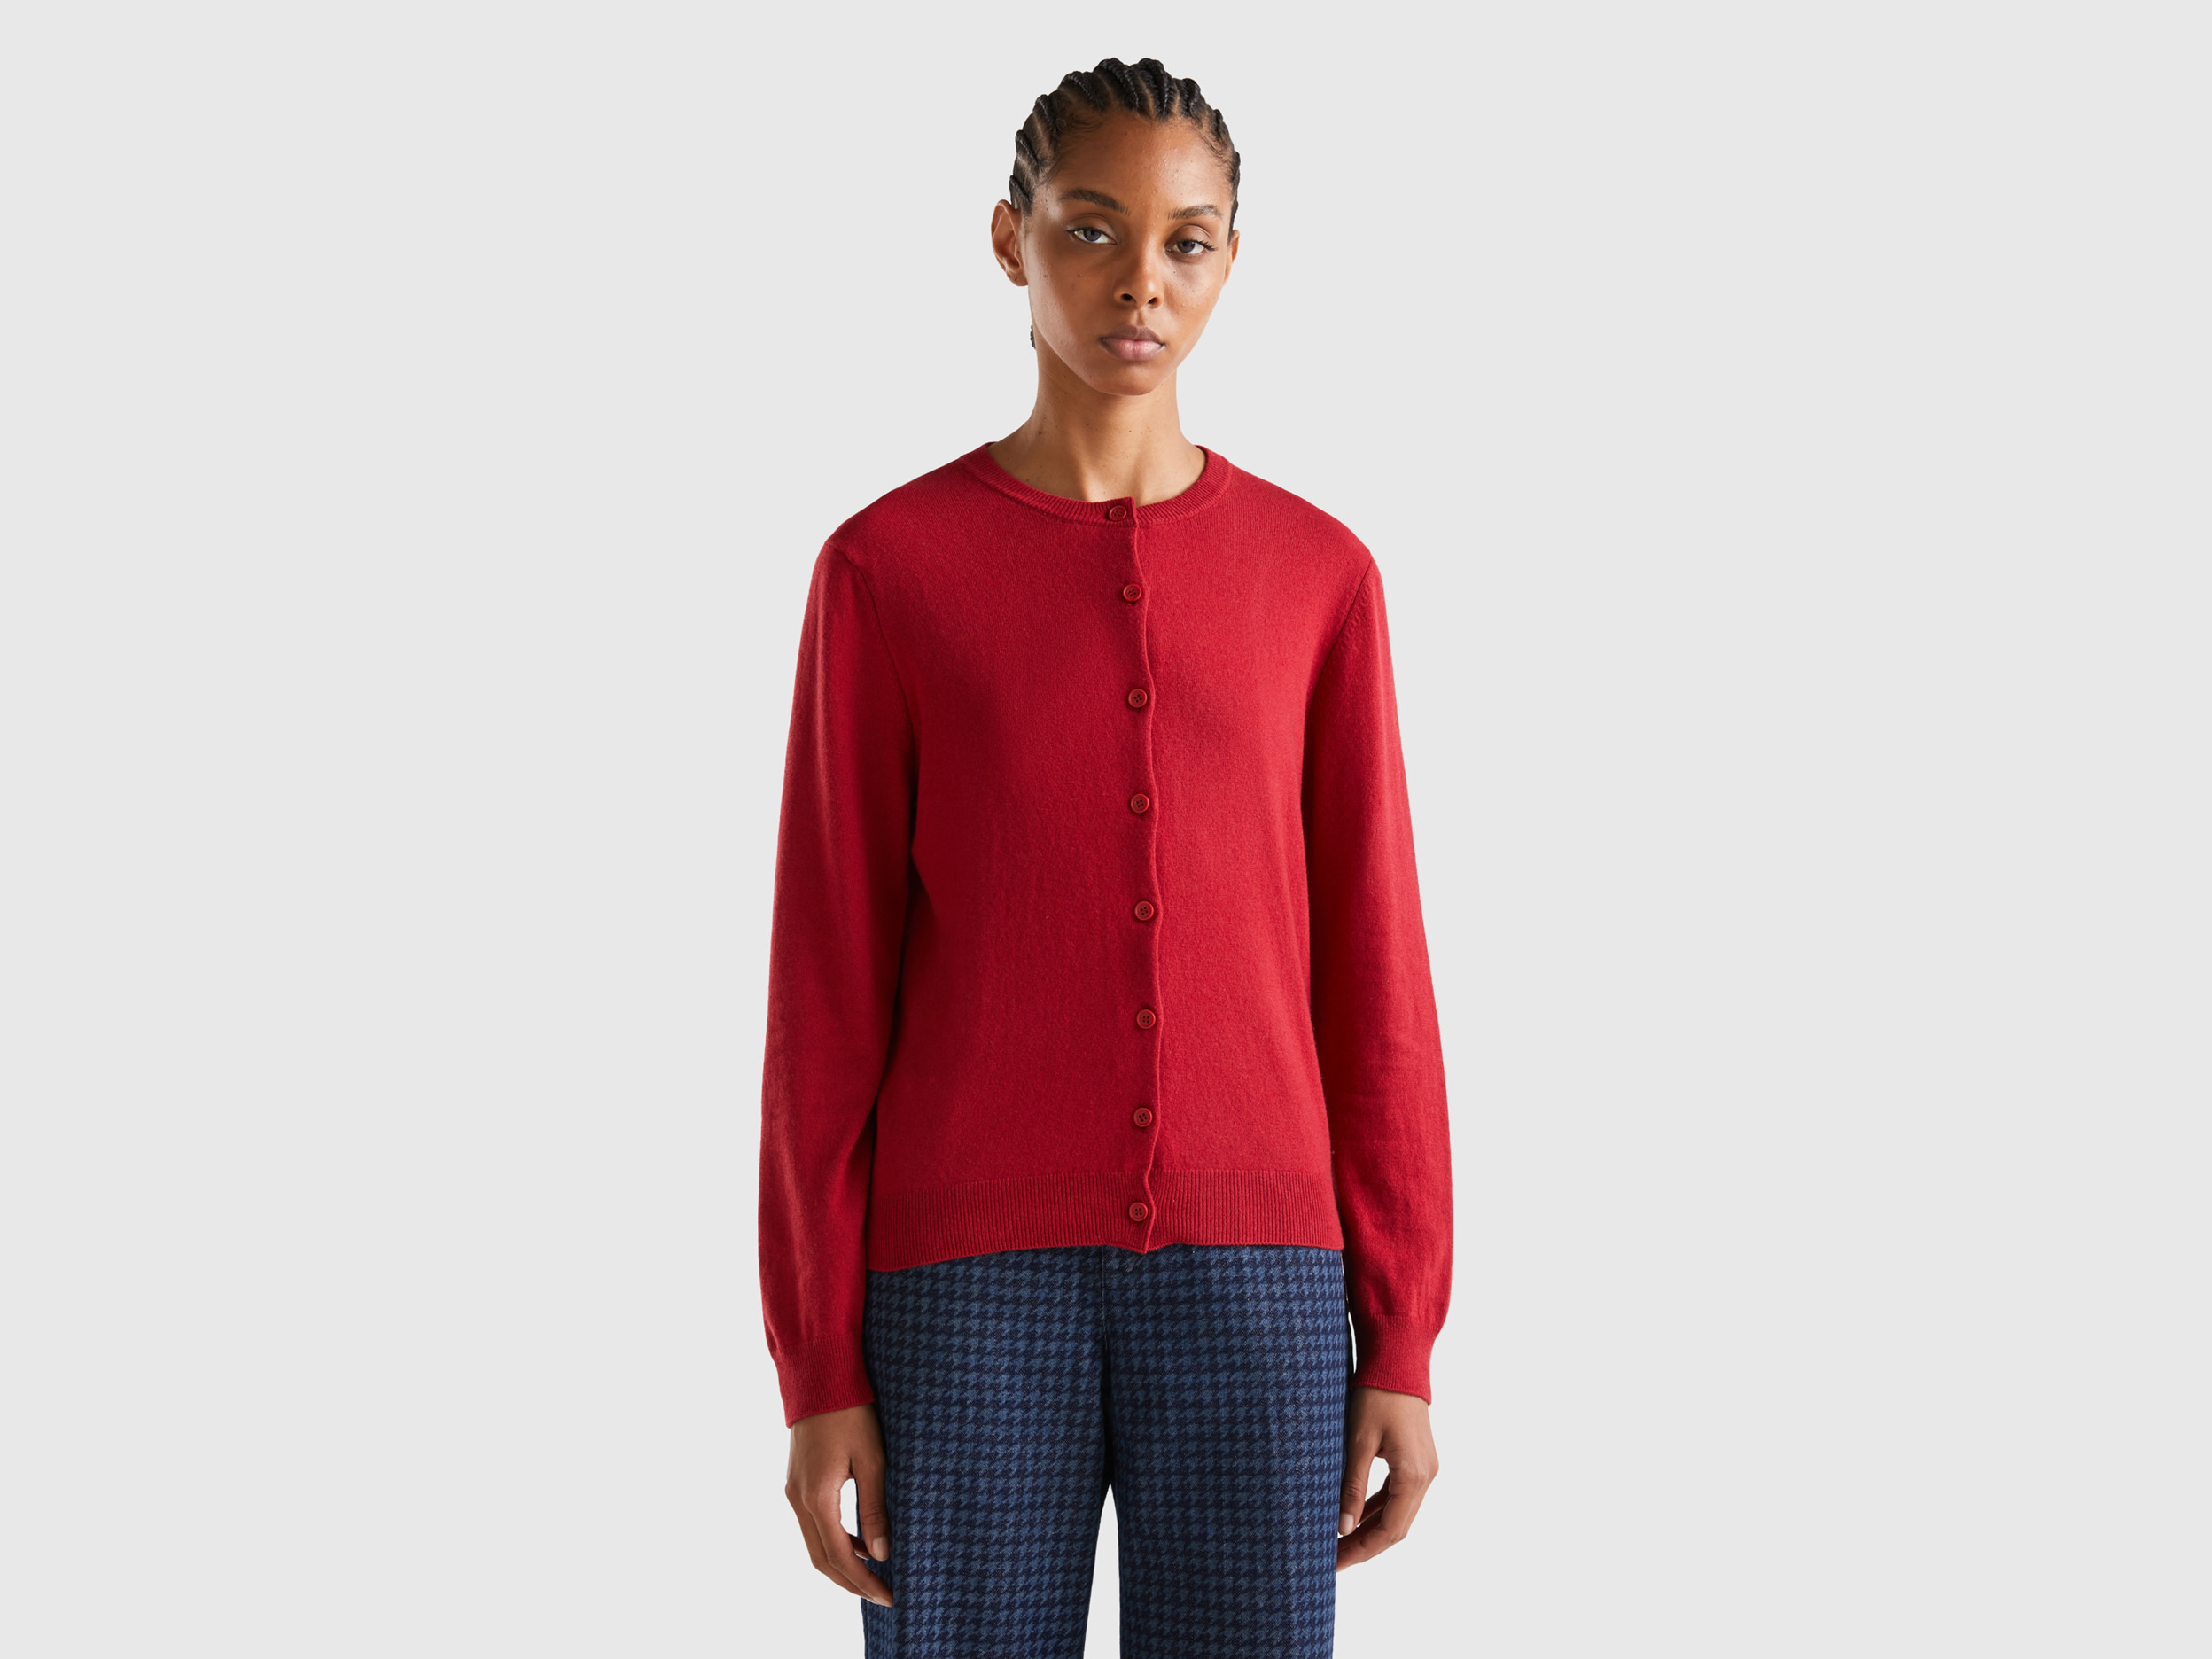 Benetton, Brick Red Cardigan In Cashmere And Wool Blend, size XS, Brick Red, Women